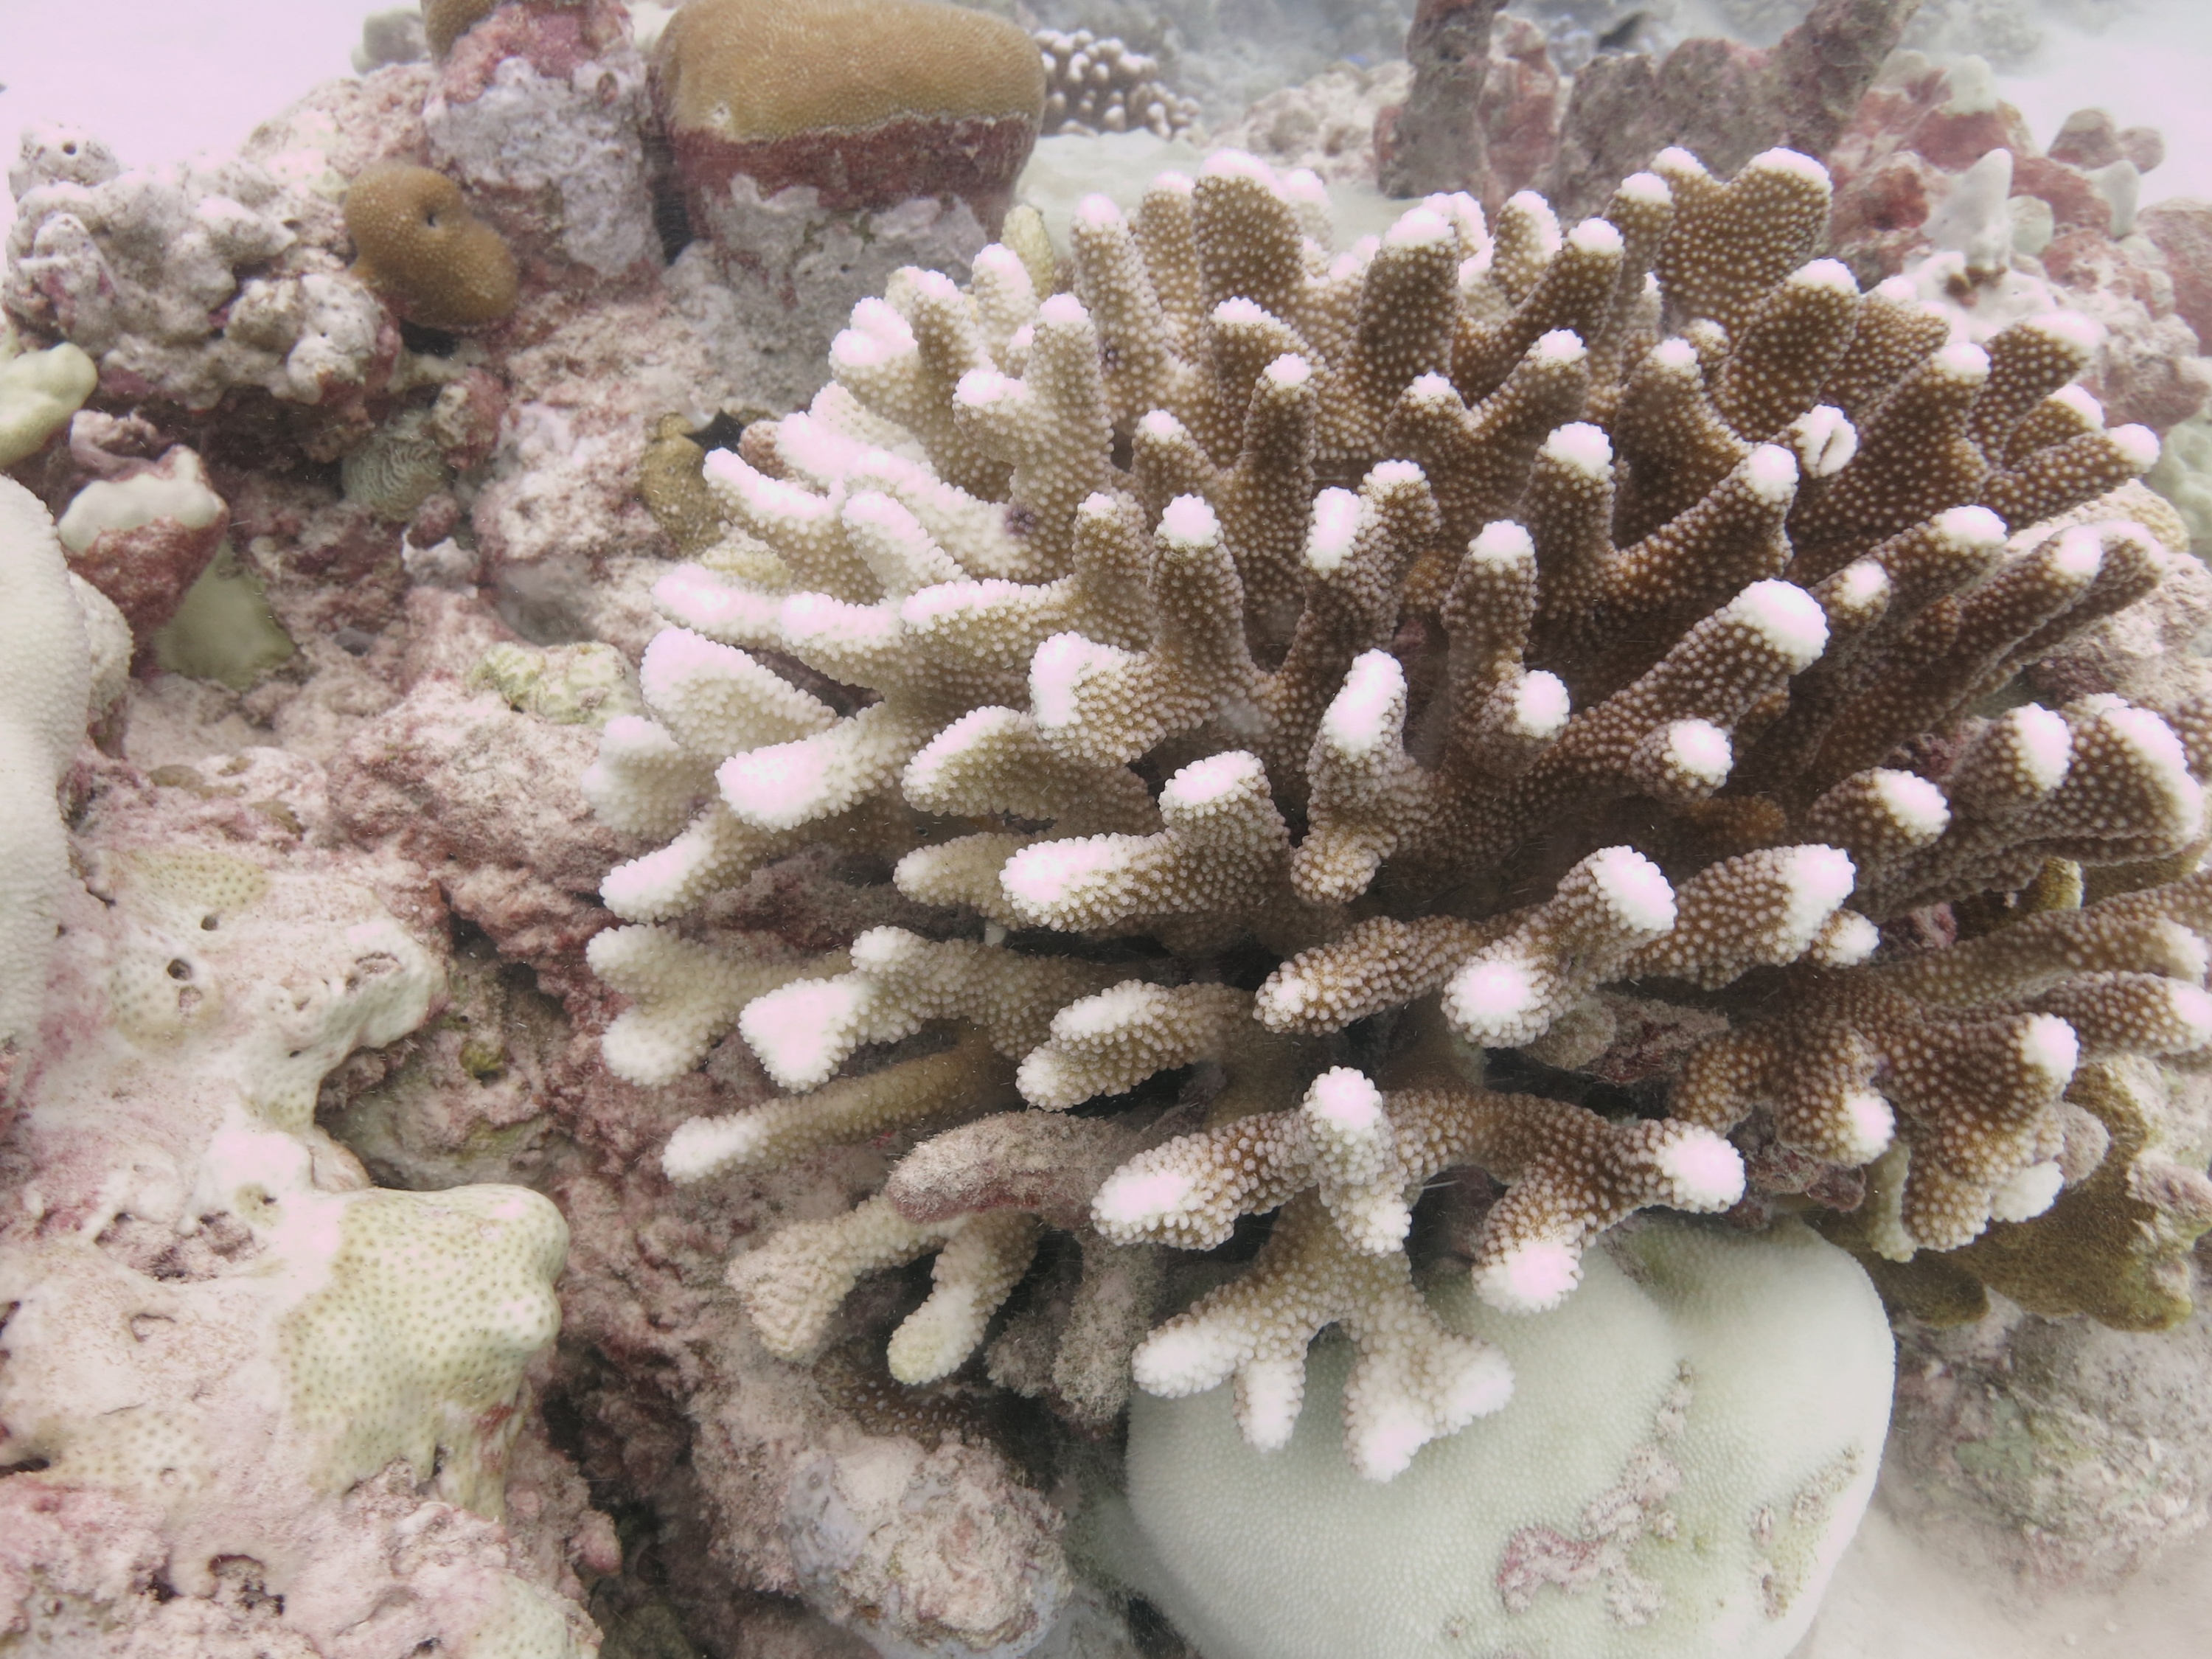 A Pocillopora coral colony is shown in the process of bleaching on a Christmas Island reef in early November. (Credit: Pamela Grothe, Georgia Tech)